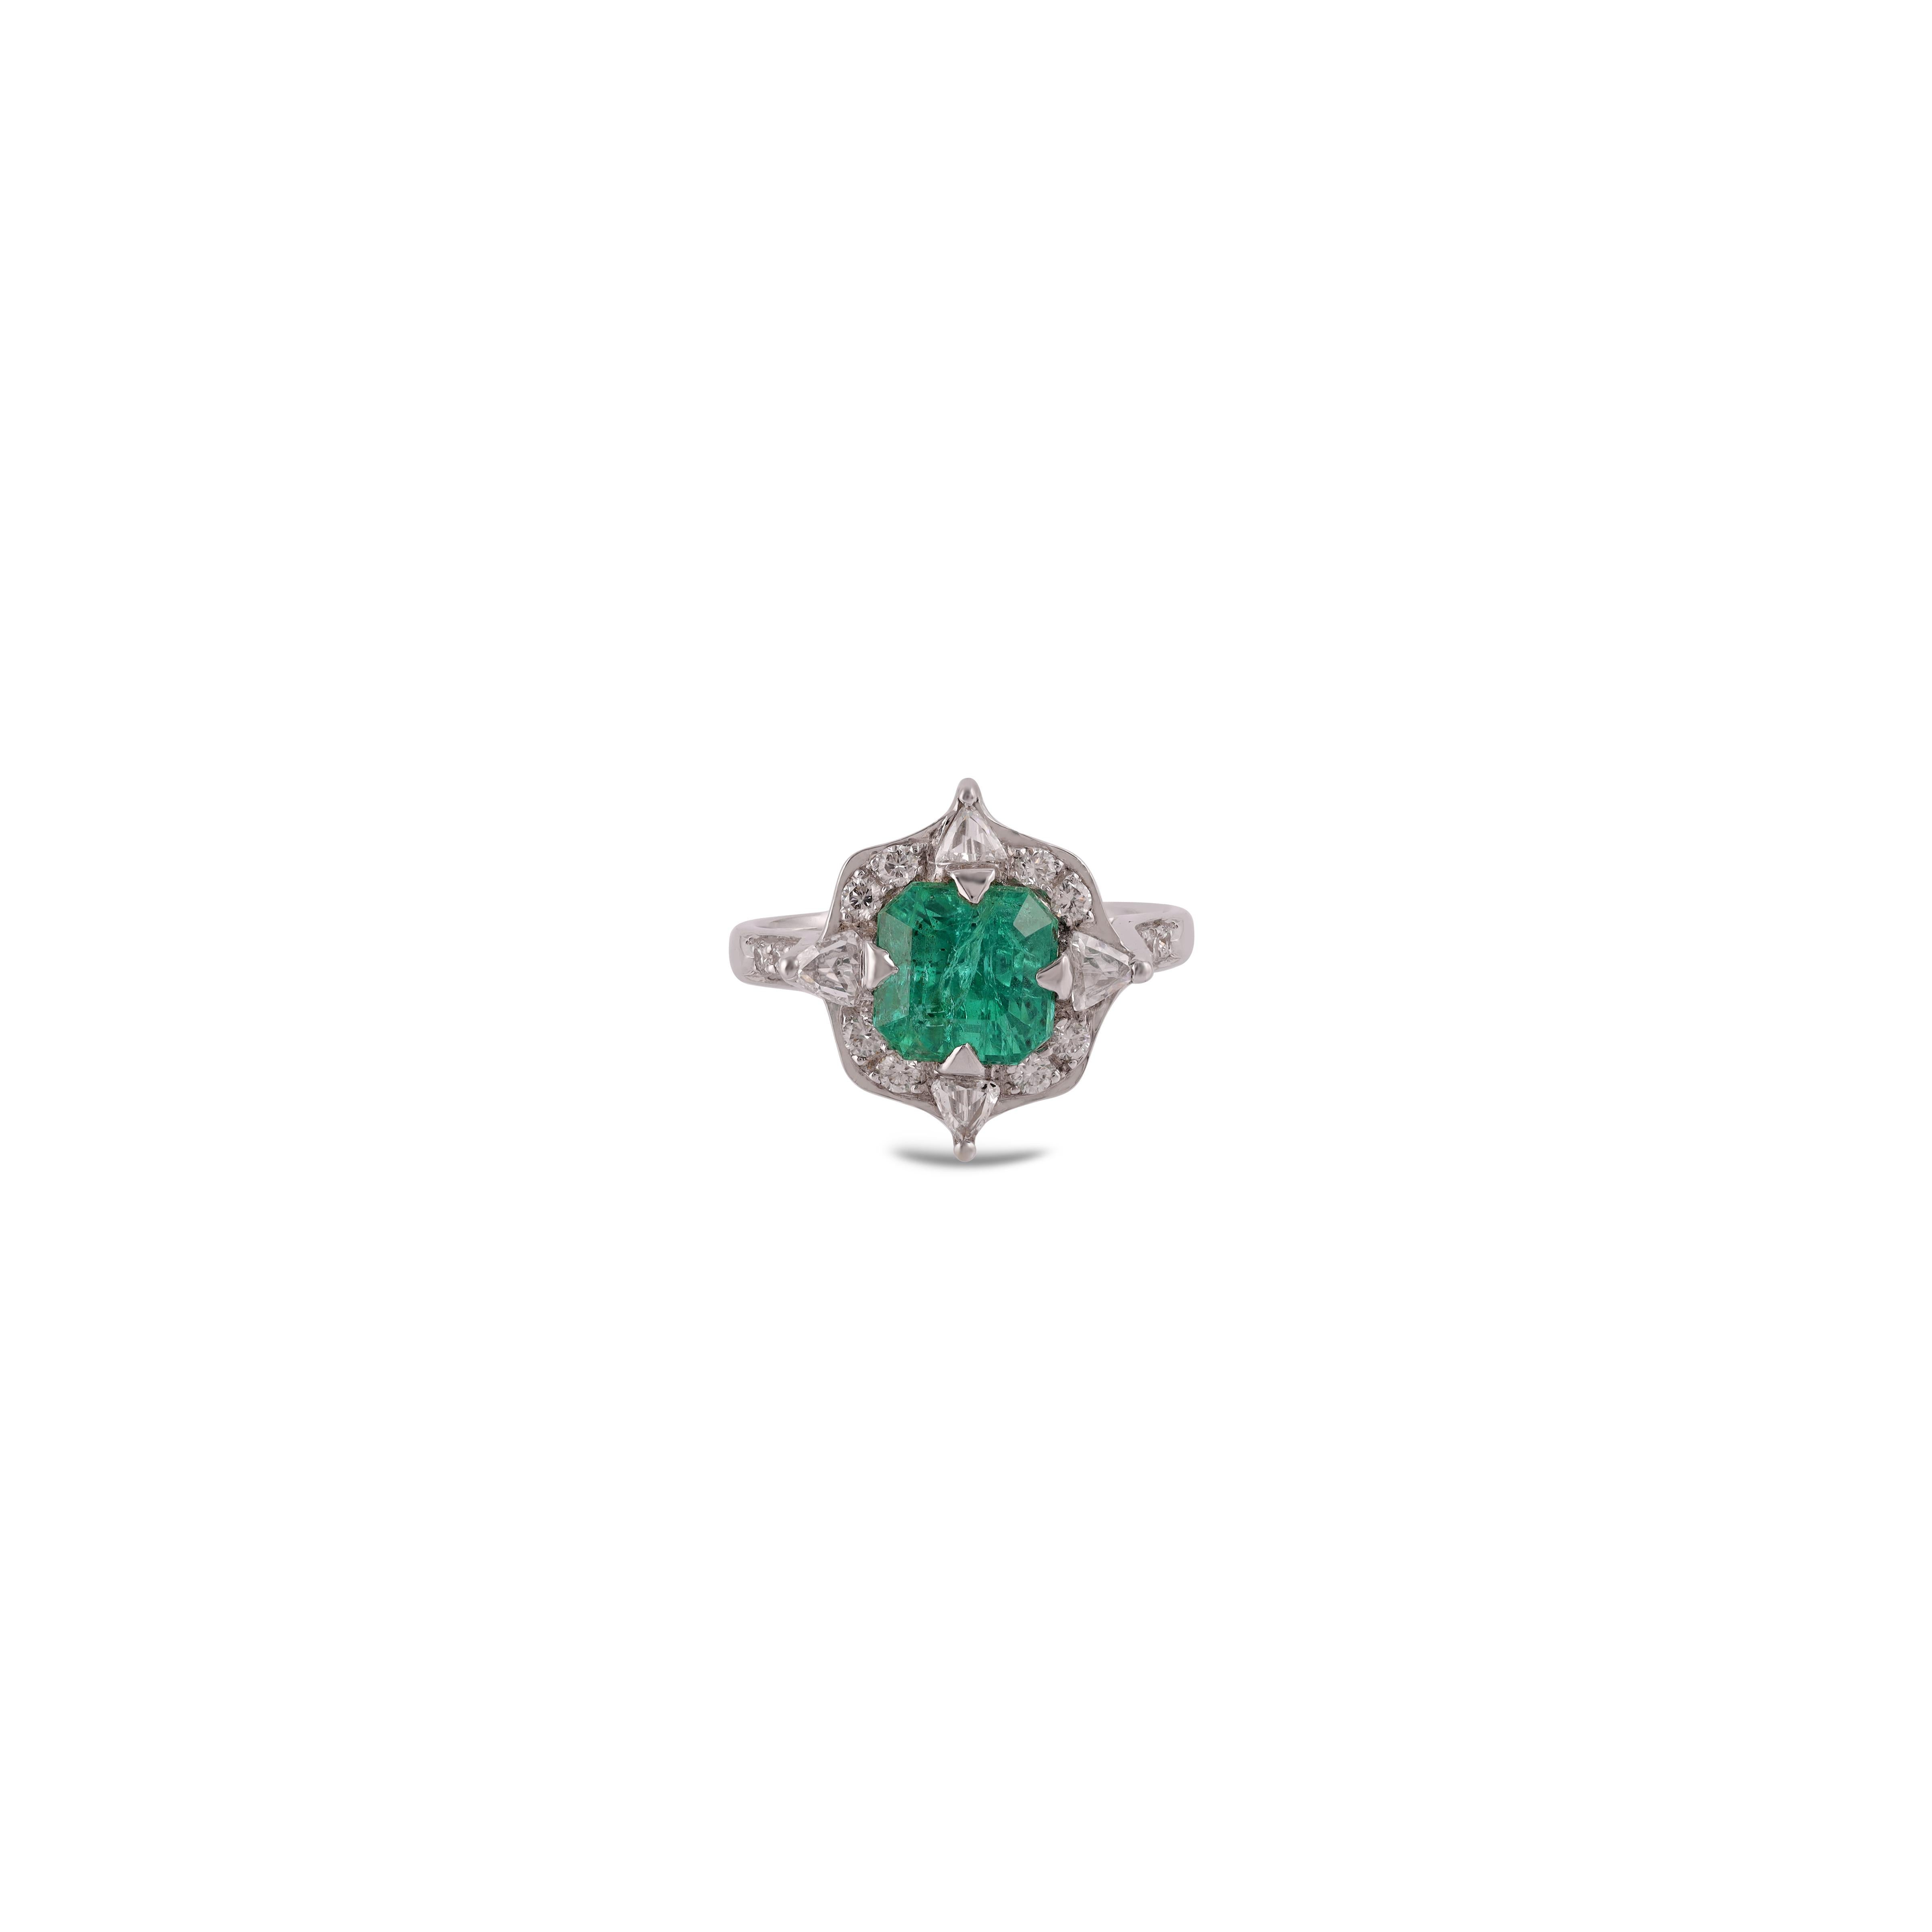 This is an elegant emerald & diamond ring studded in 18k gold with 1 piece of  Zambian emerald weight 2.19 carat which is surrounded by 22 pieces of diamonds weight 0.58 carat, this entire ring studded in 18k  gold.



 Ring size can be change as